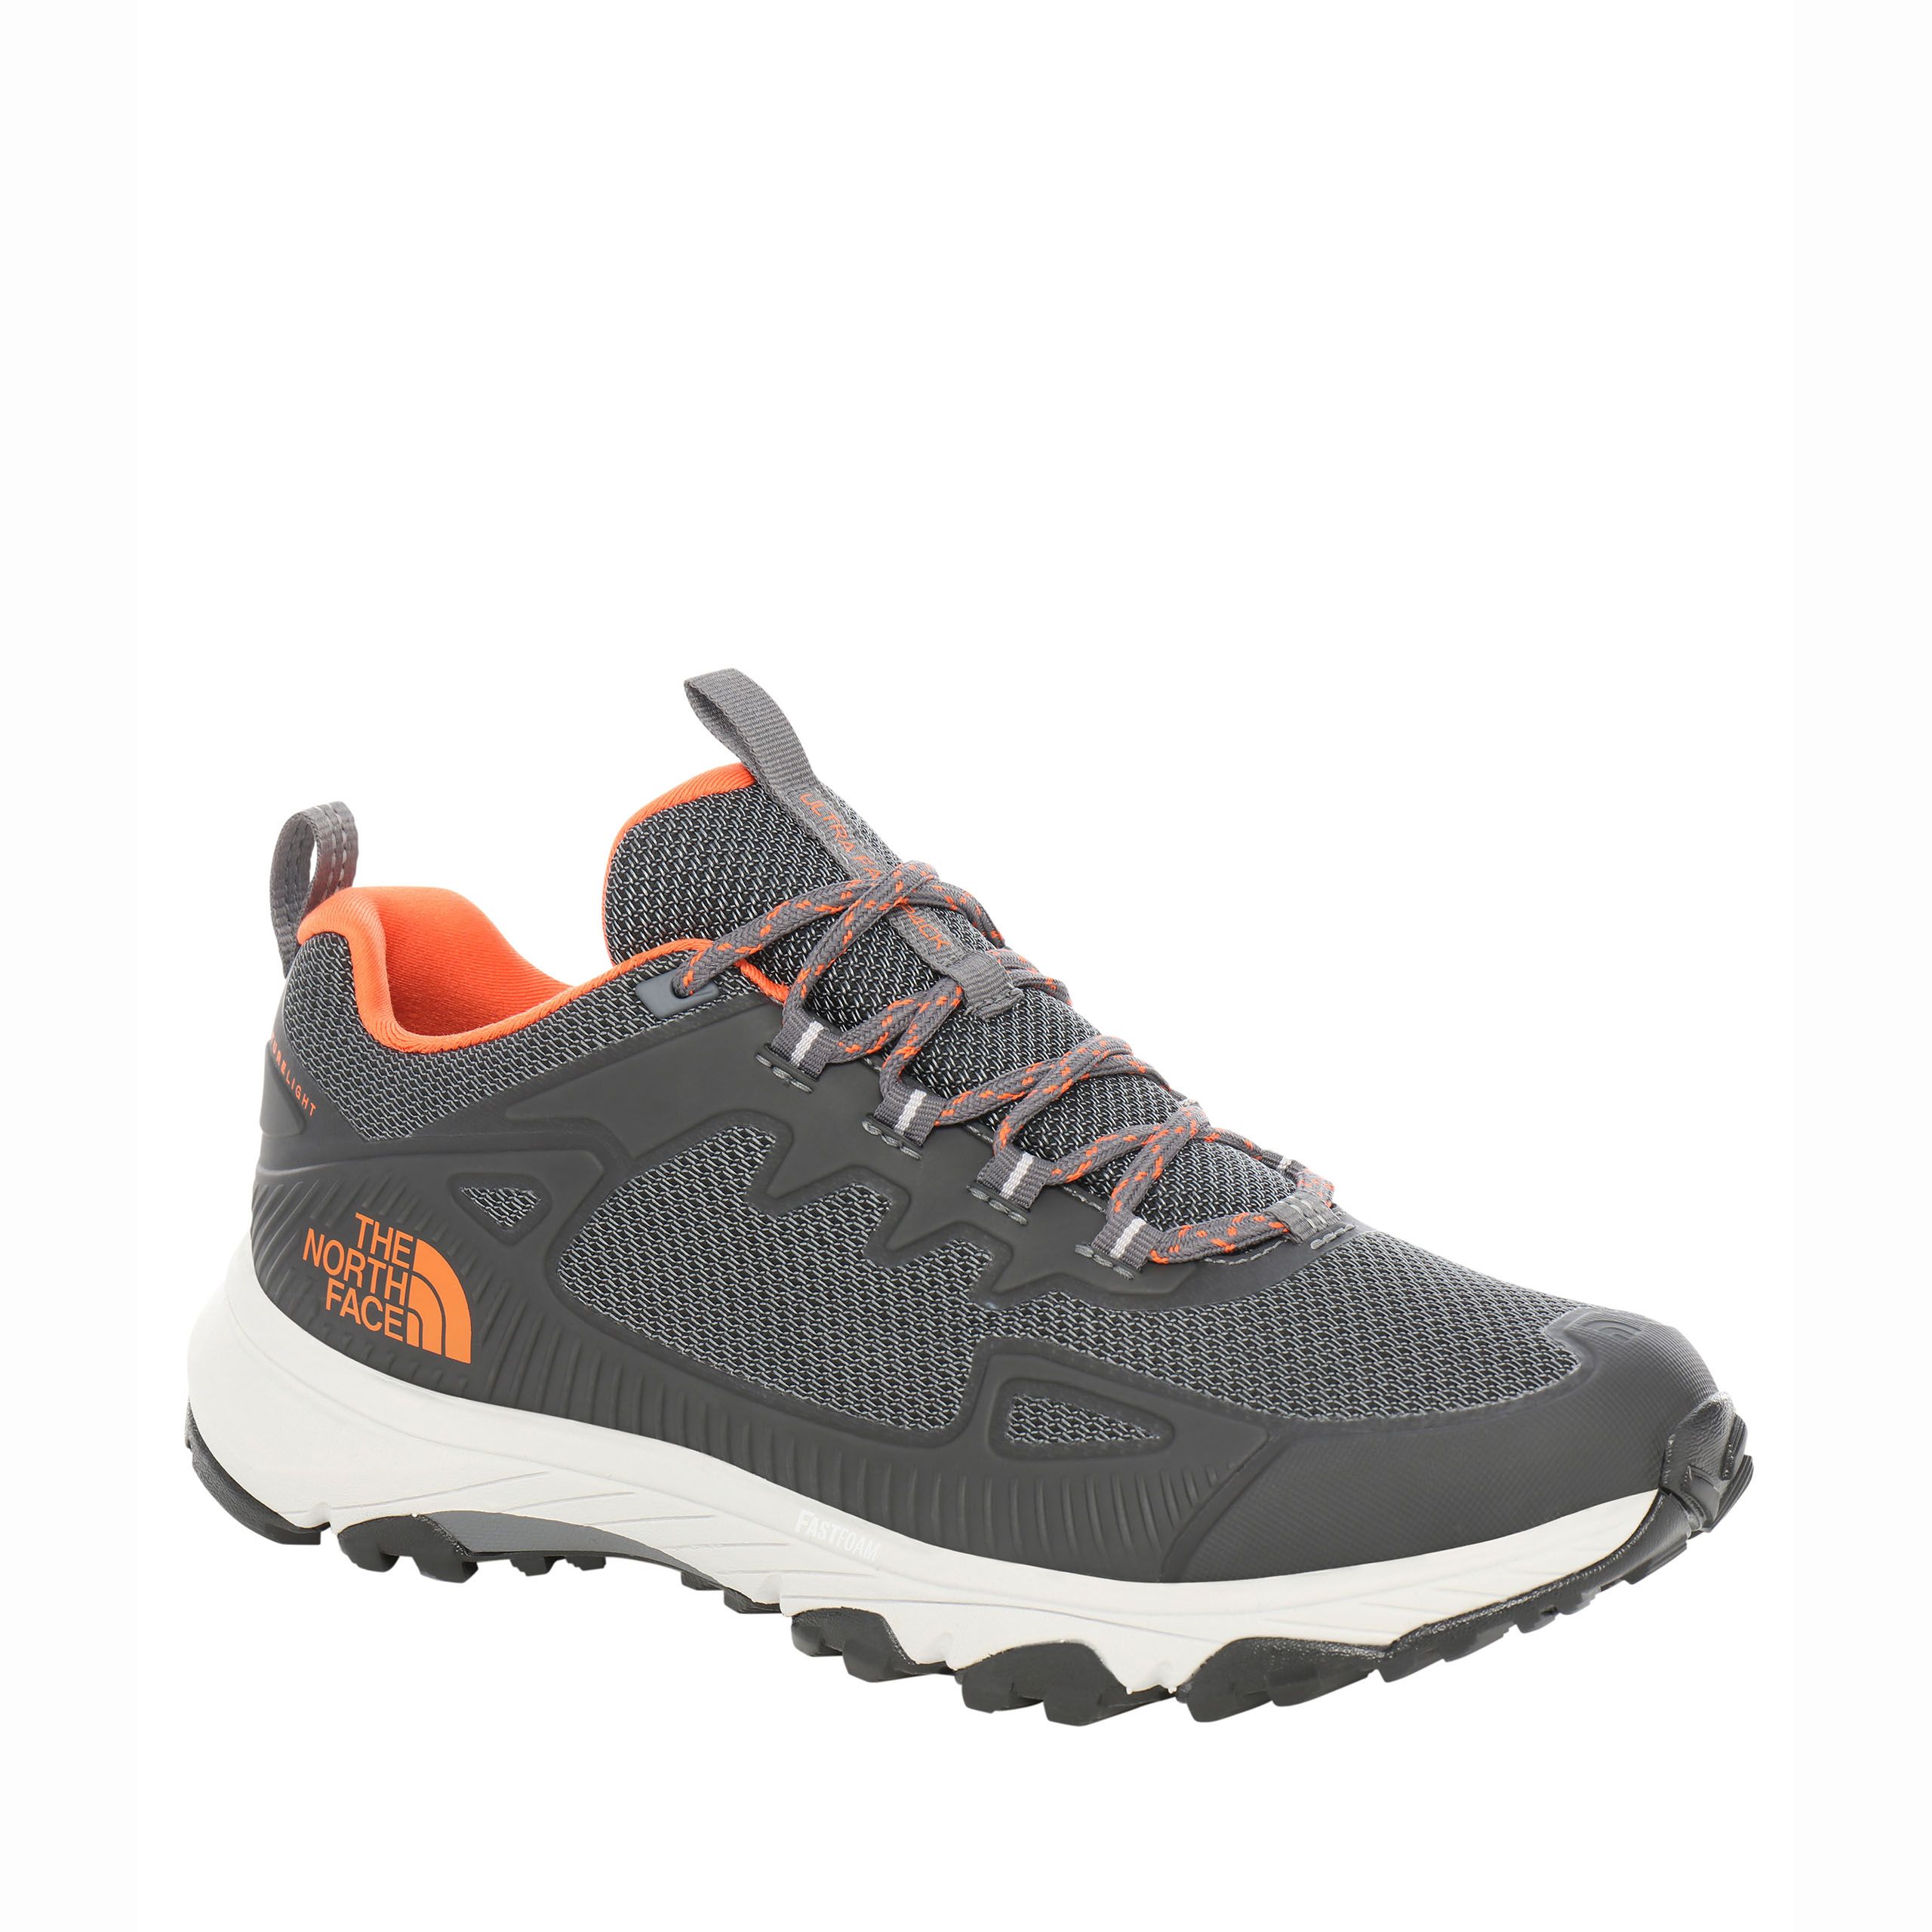 The North Face Mens Ultra Fastpack Walking Shoes